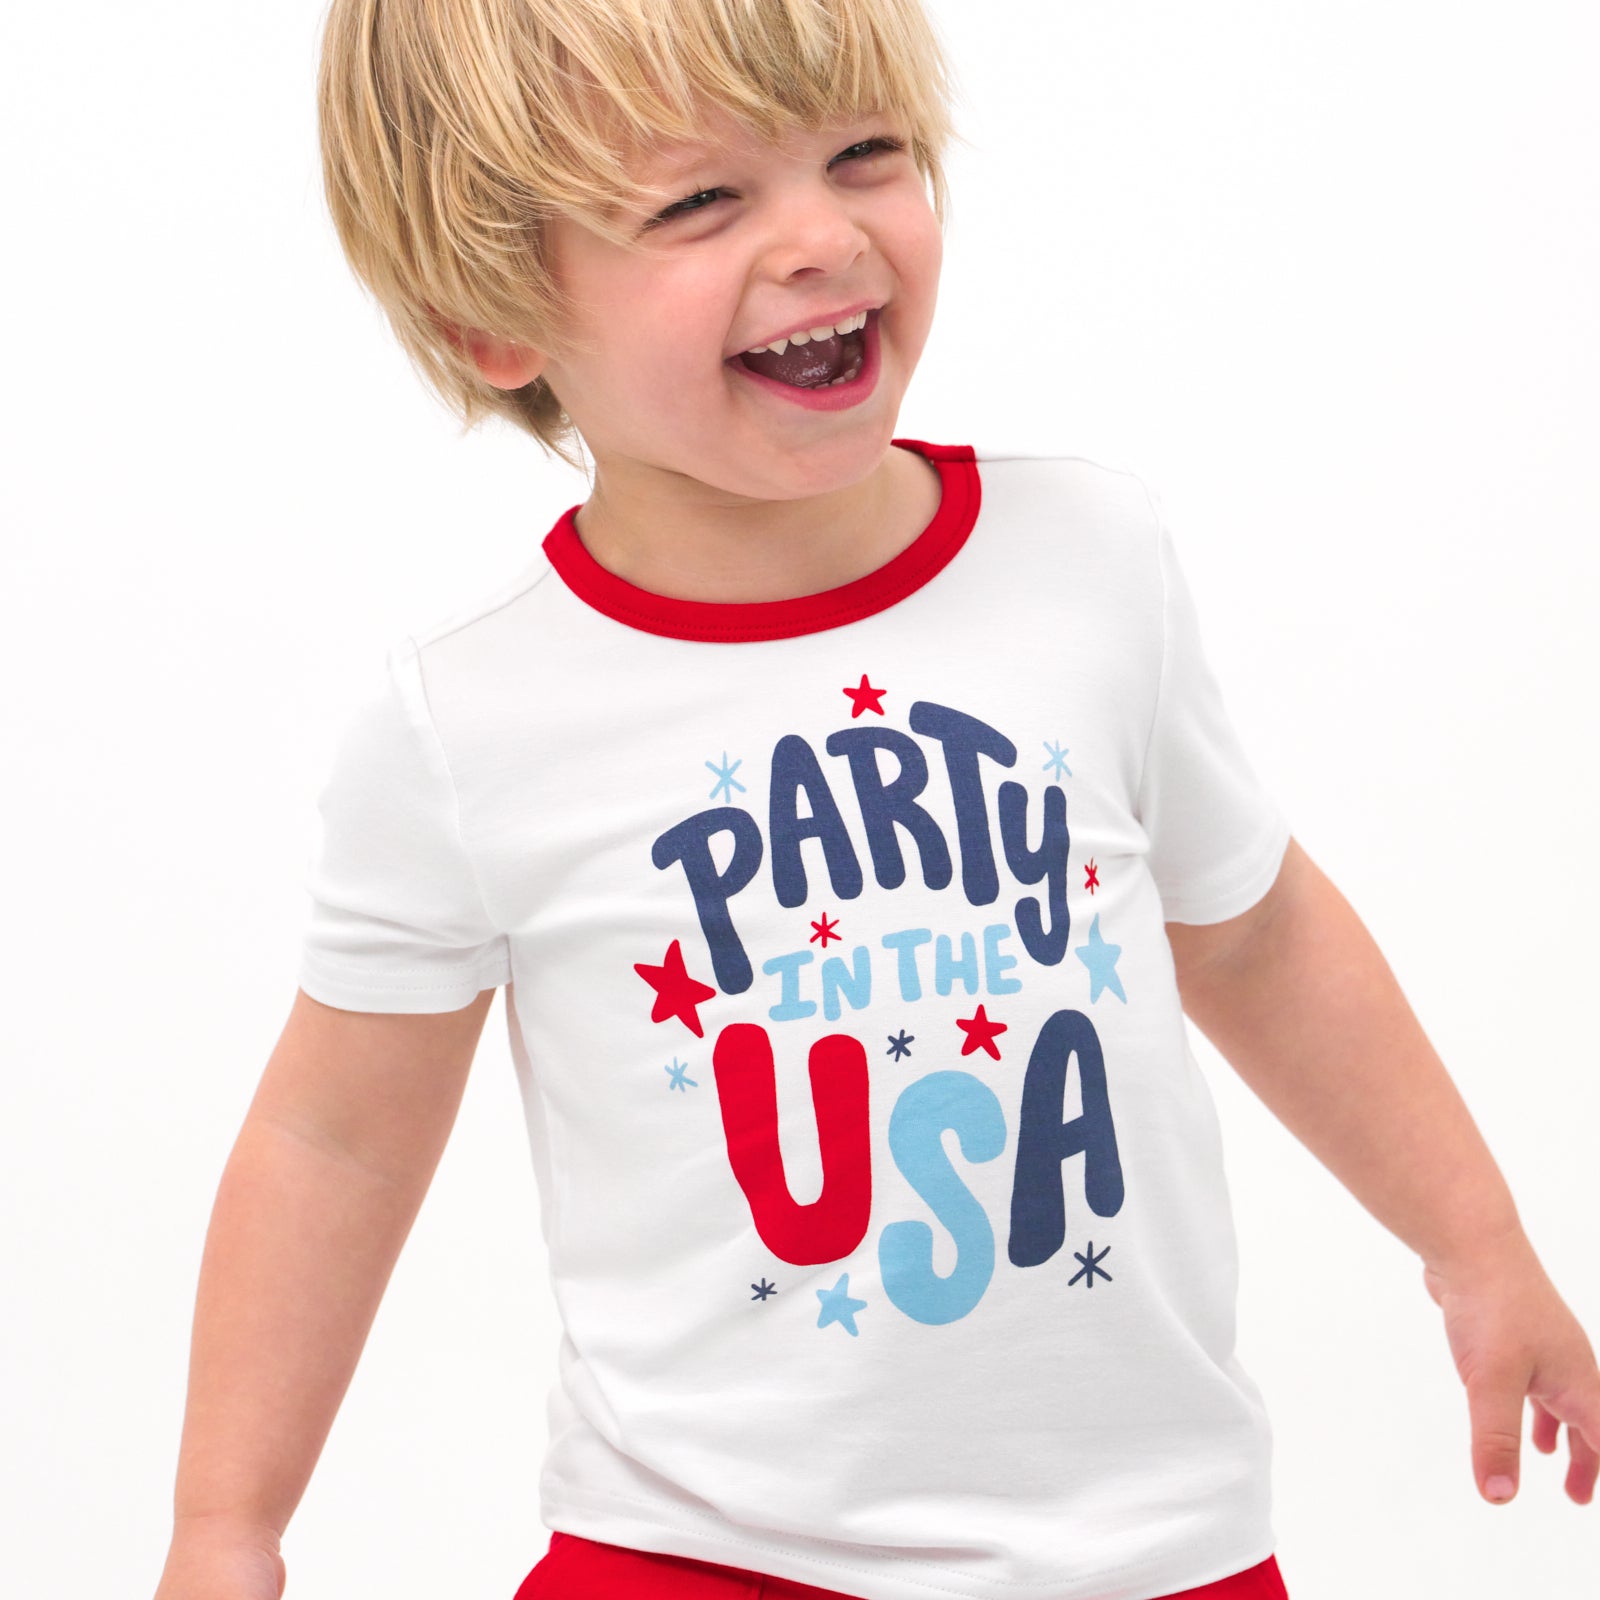 Close up image of a child wearing a Party in the USA graphic tee